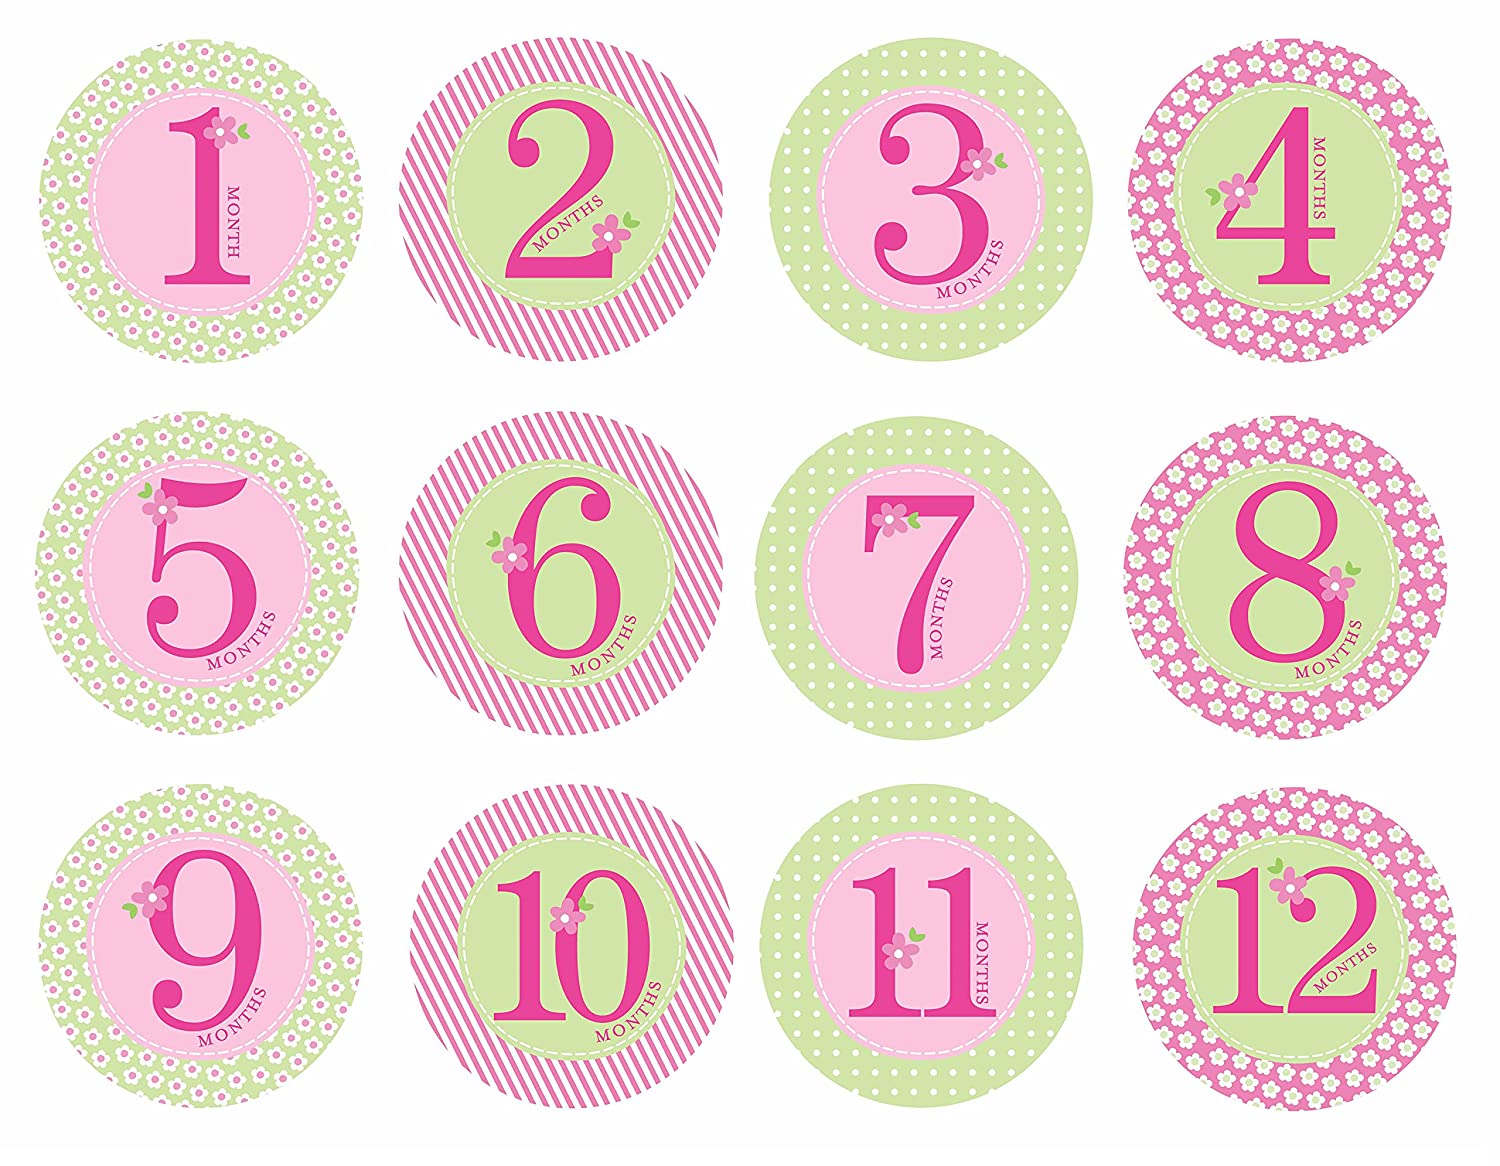 PEARHEAD Baby Milestone Stickers Pink - ANB Baby -Baby Milestone Stickers